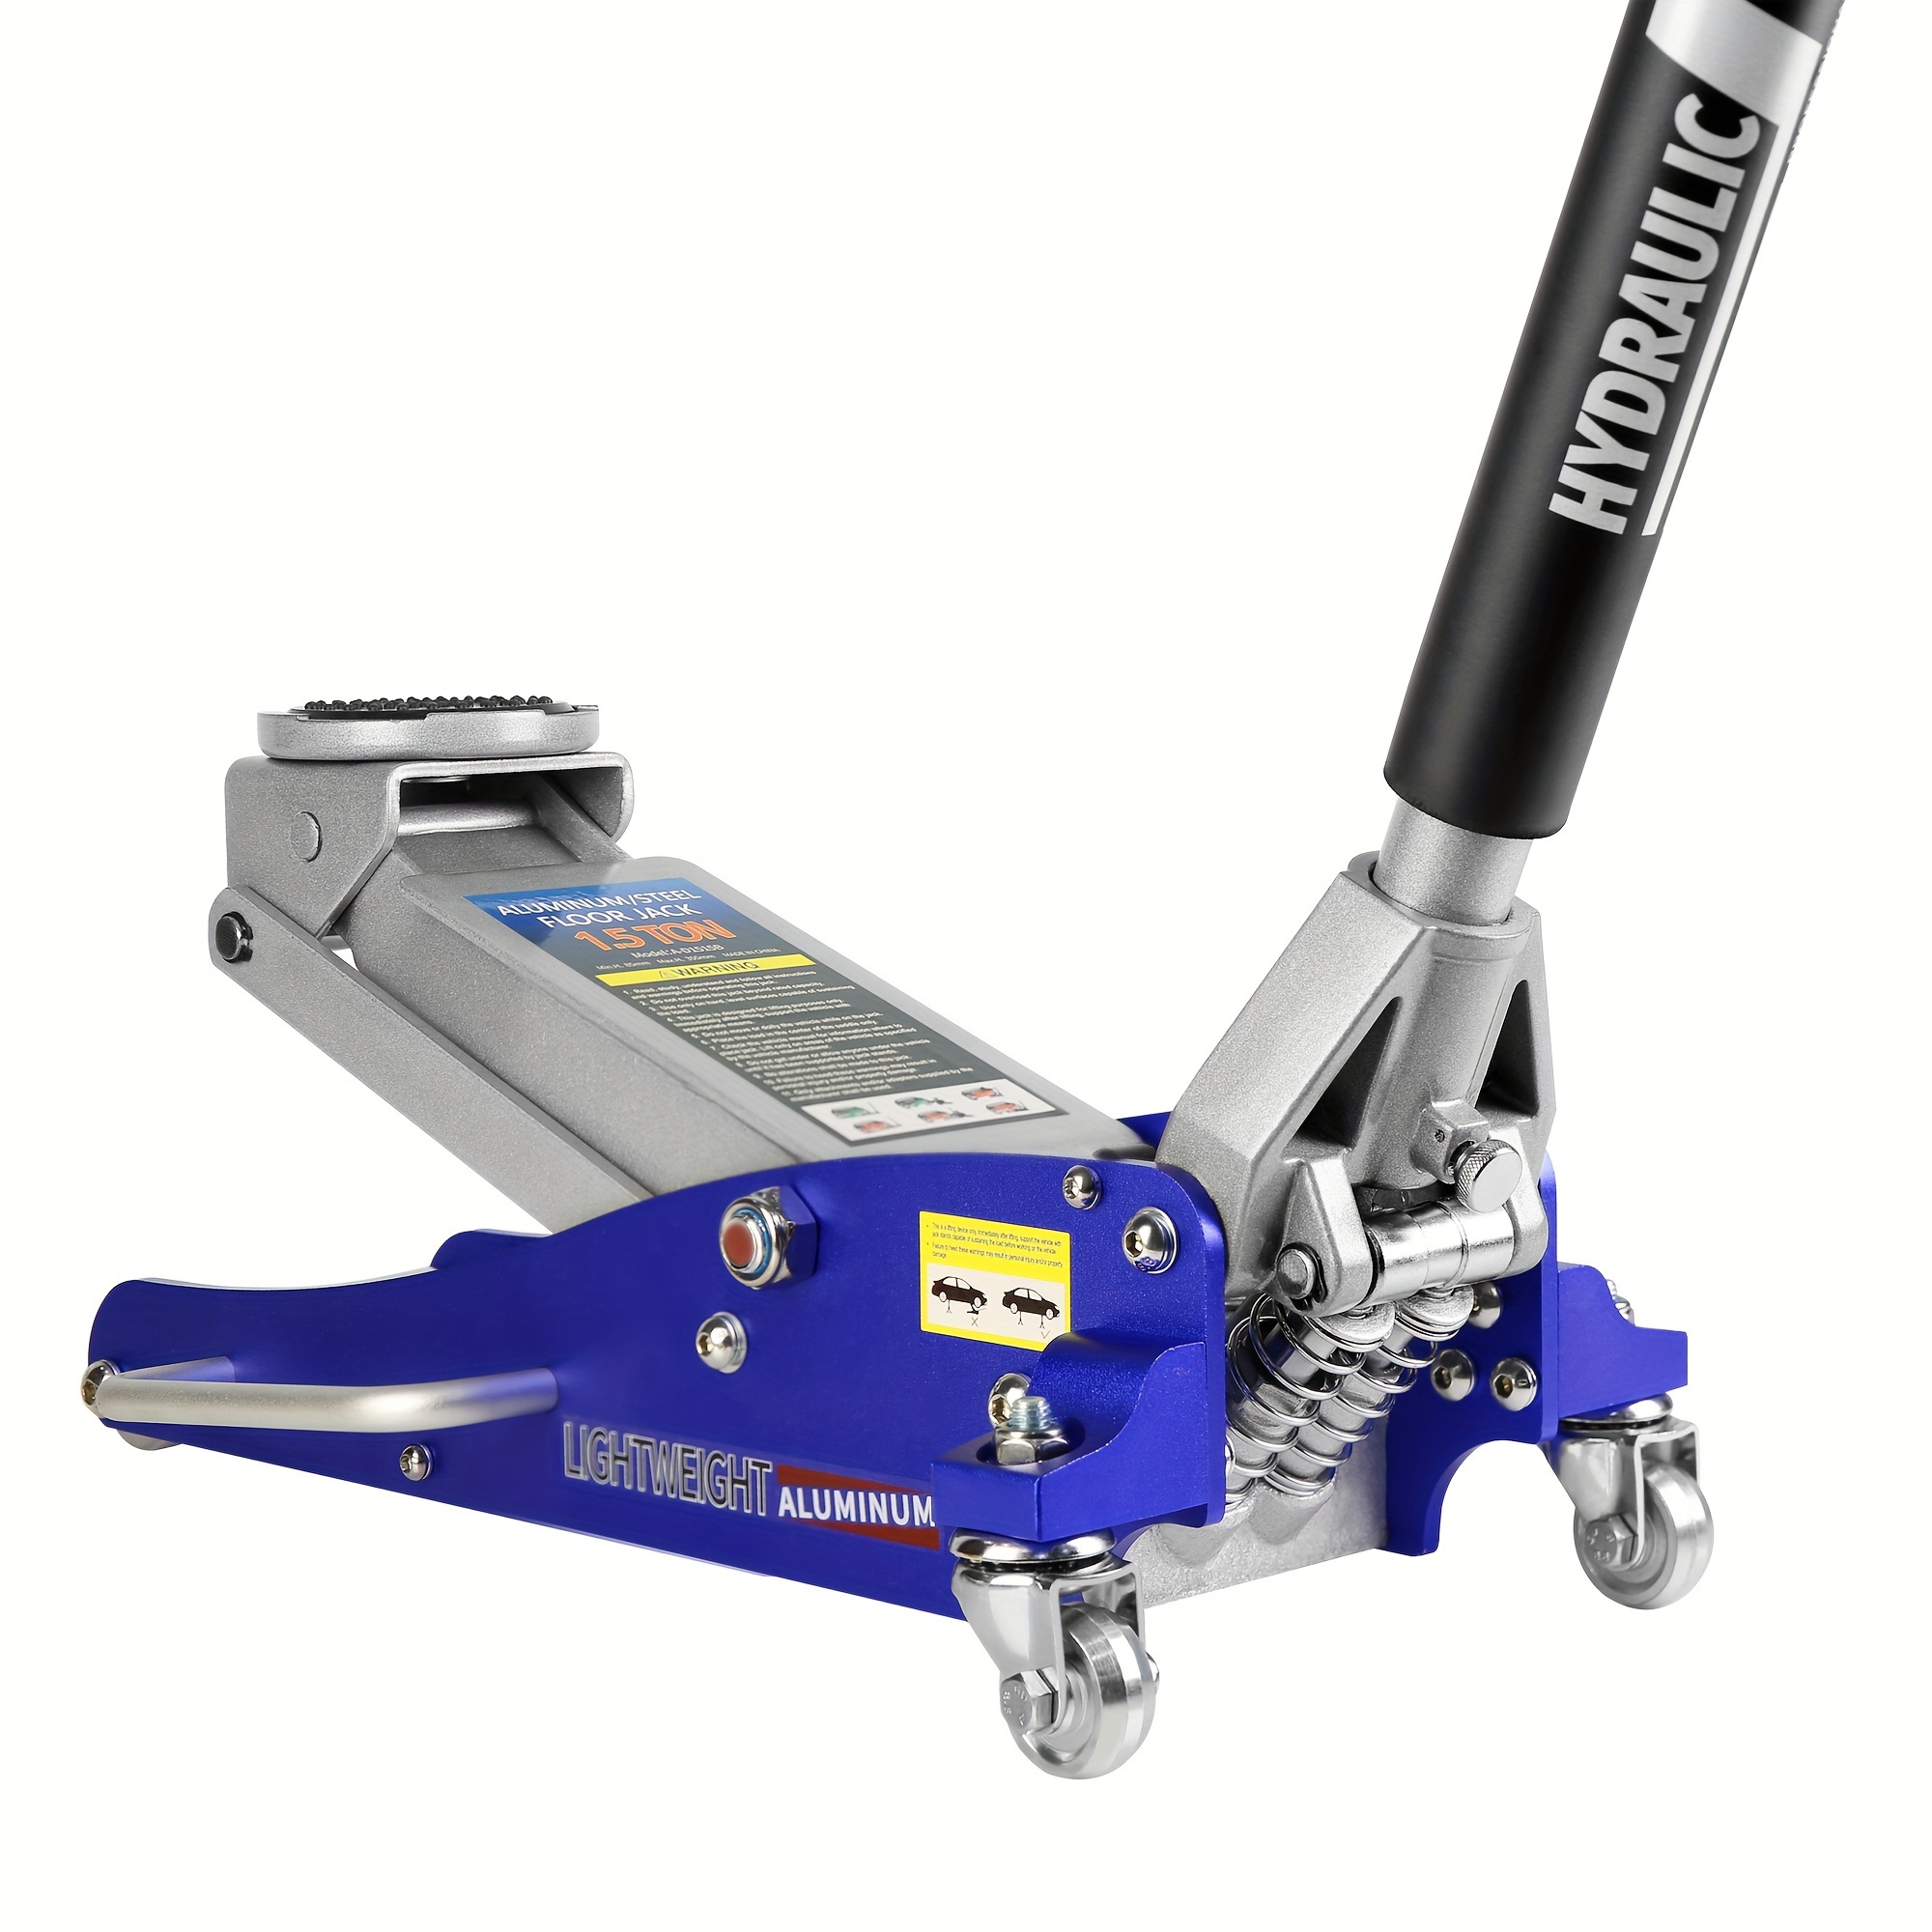 

Hydraulic Low Profile Aluminum And Steel Racing Floor Jack With Dual Piston Quick Lift Pump, 1.5 Ton (3, 000 Lb) Capacity, Blue